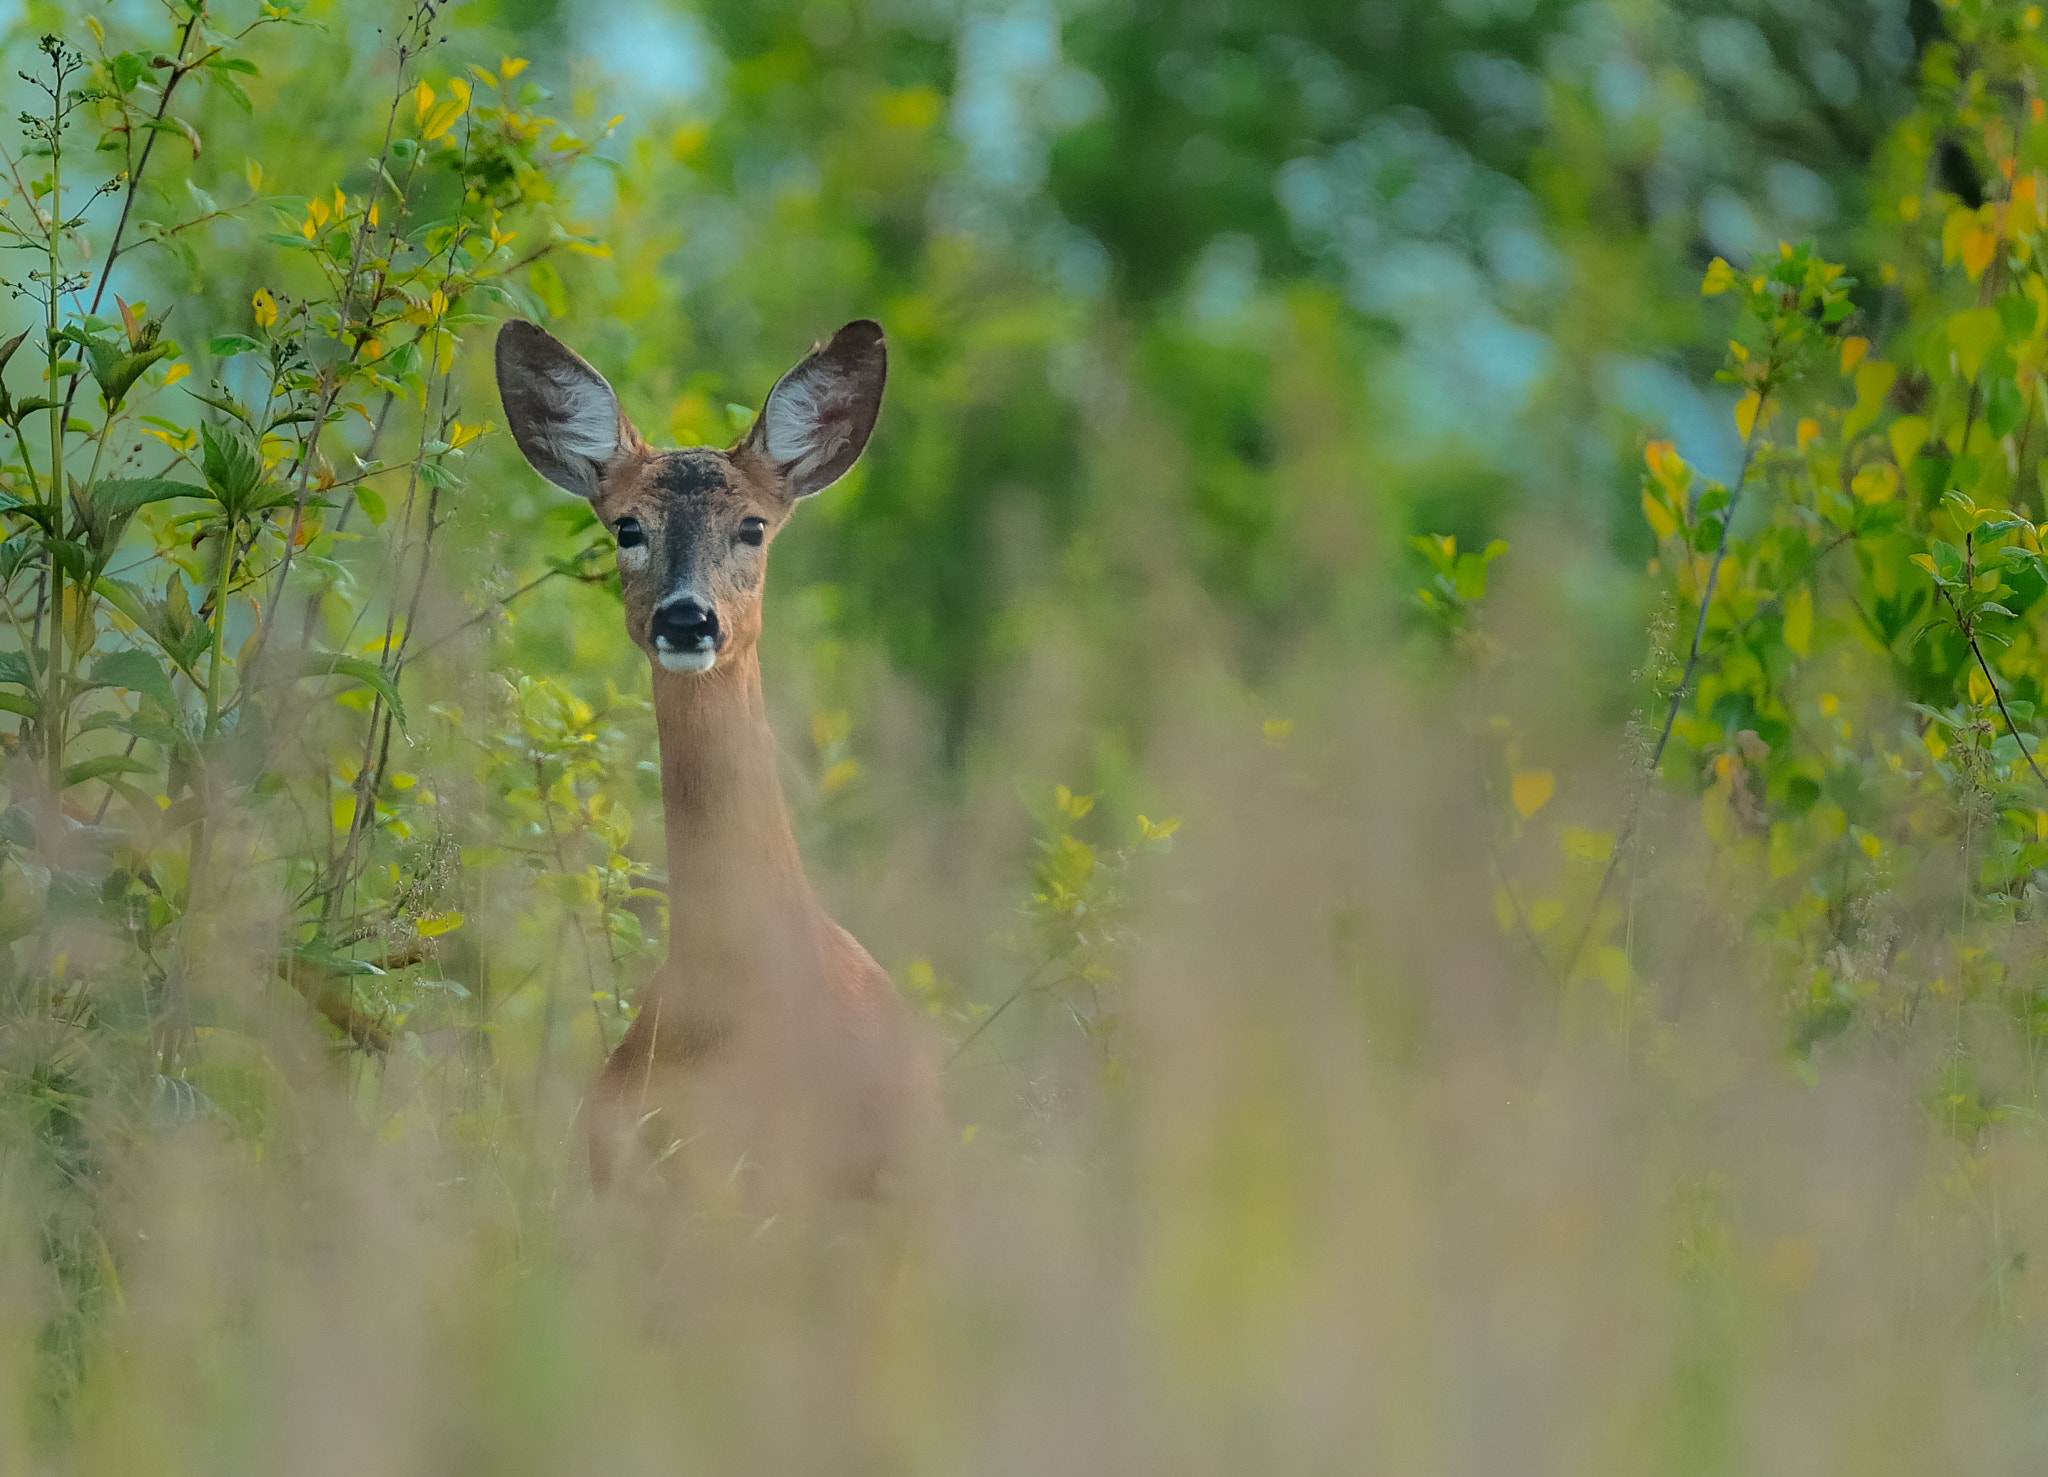 Nikon D3 + Tamron SP 150-600mm F5-6.3 Di VC USD sample photo. Curiosity killed the cat..but not this deer photography